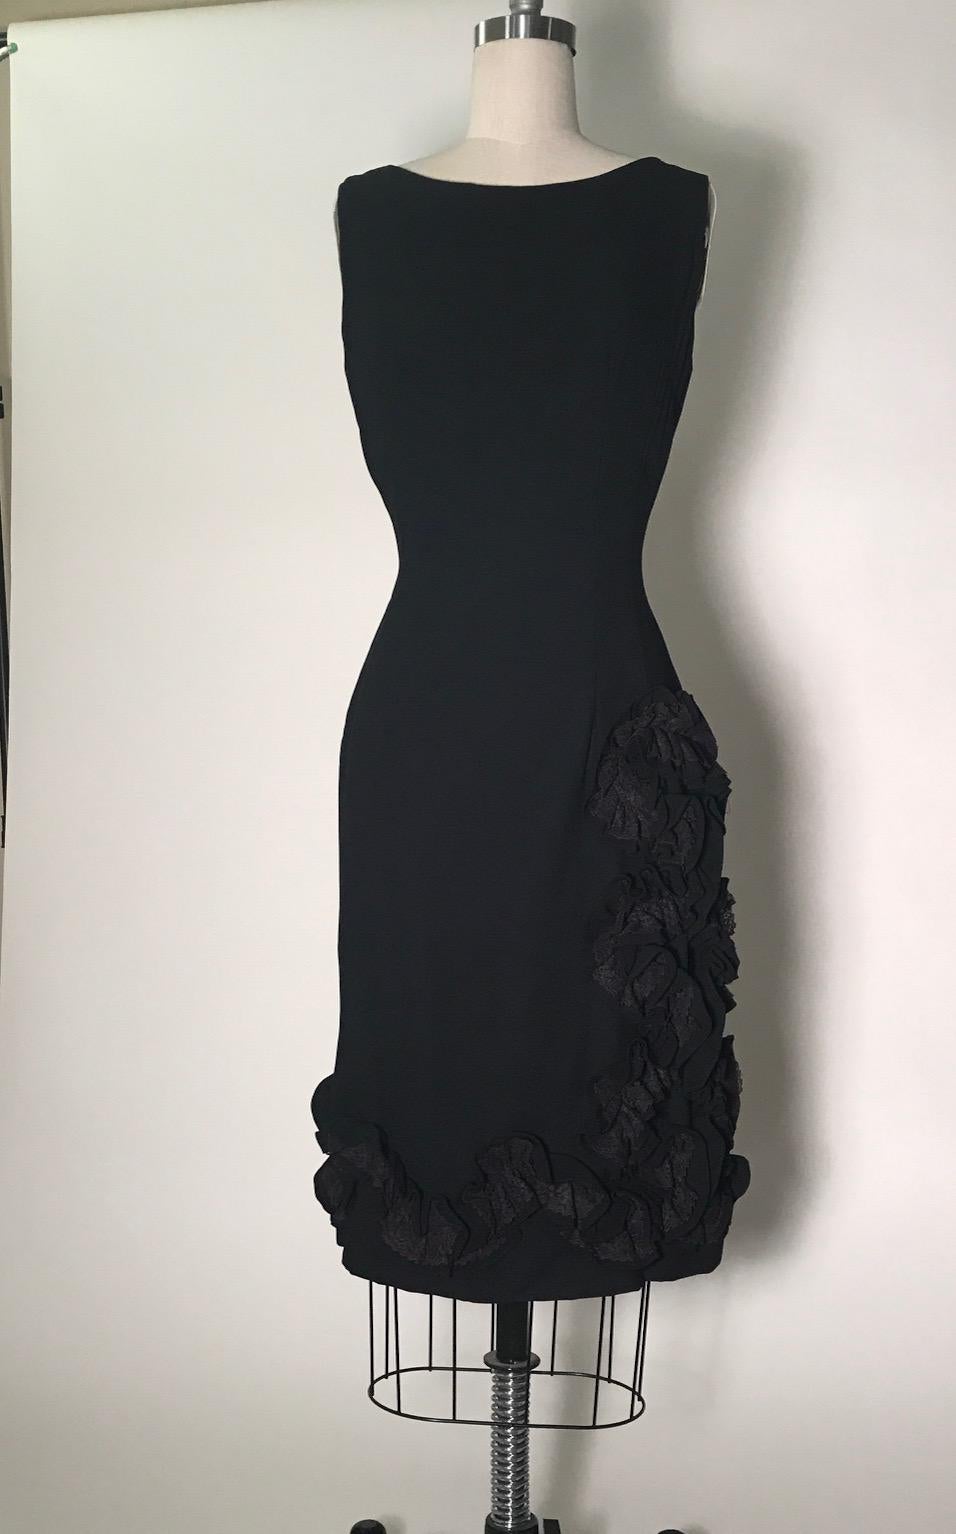 Alfred Werber of Saint Louis 1960's vintage little black dress. Sleeveless, tailored shape. Ruffle detail  with lace accent runs up side and around hem. Back metal zip and hook.

No content tag, feels like silk crepe. 

No size tag, best fits a size